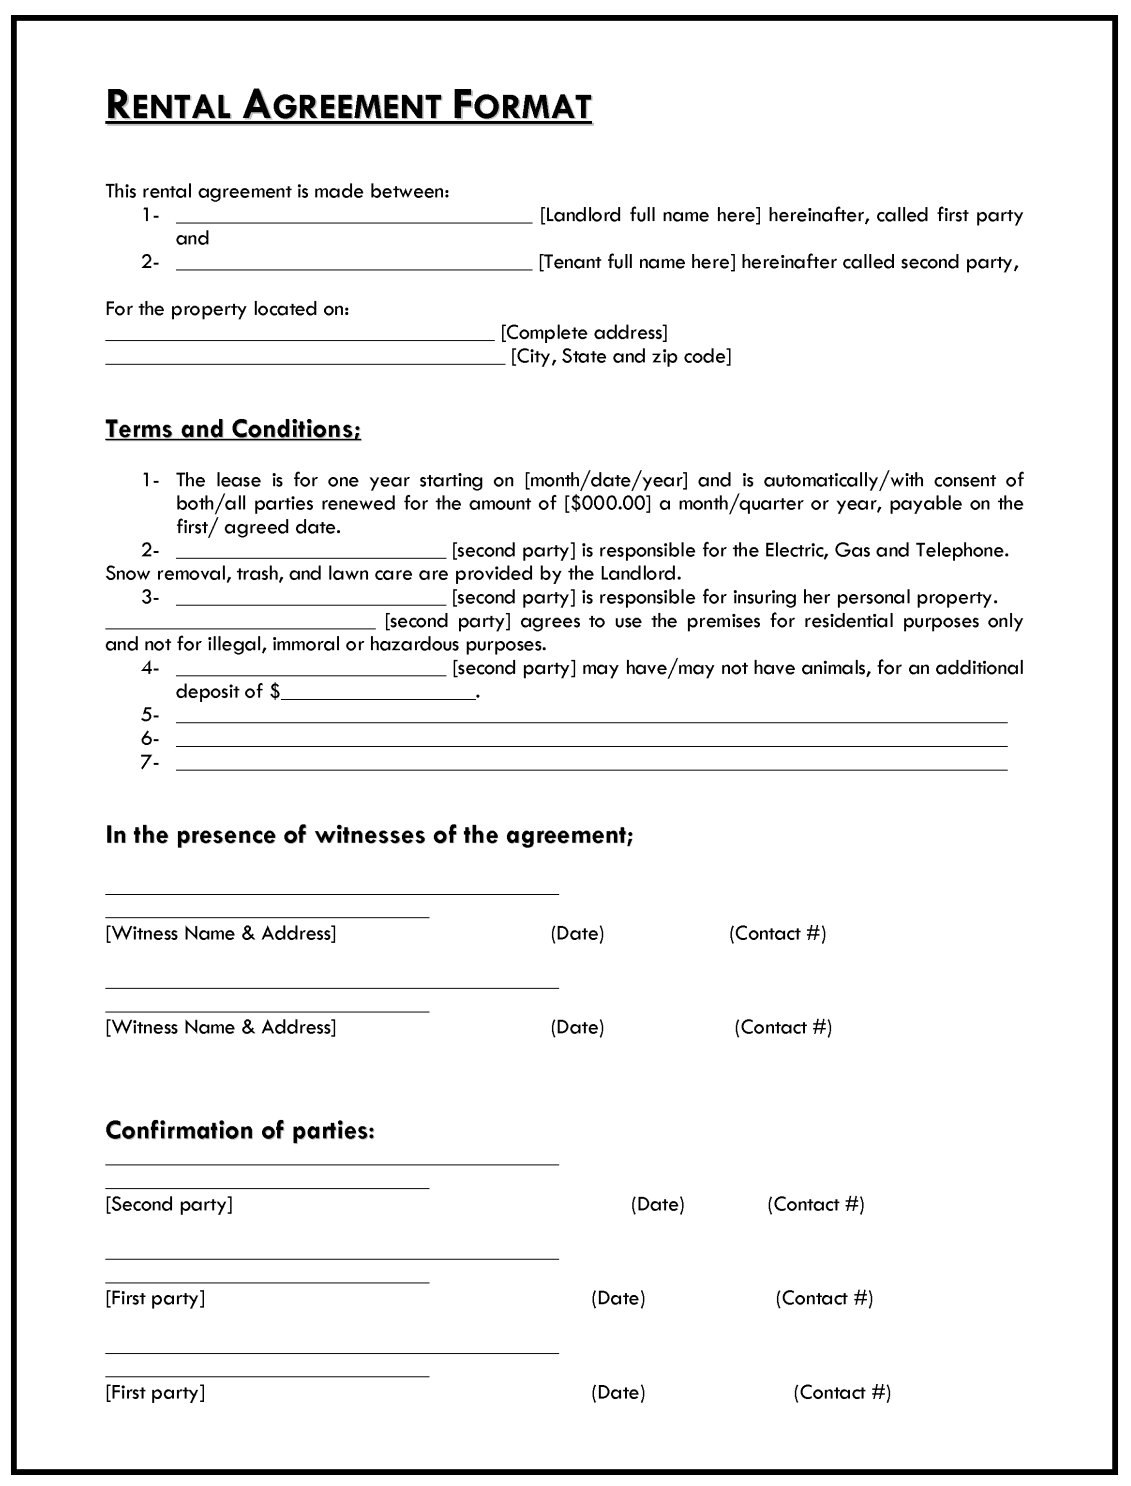 Free Rent Agreement Letter 16 Rental Agreement Letter Templates Word Apple Pages Google Docs